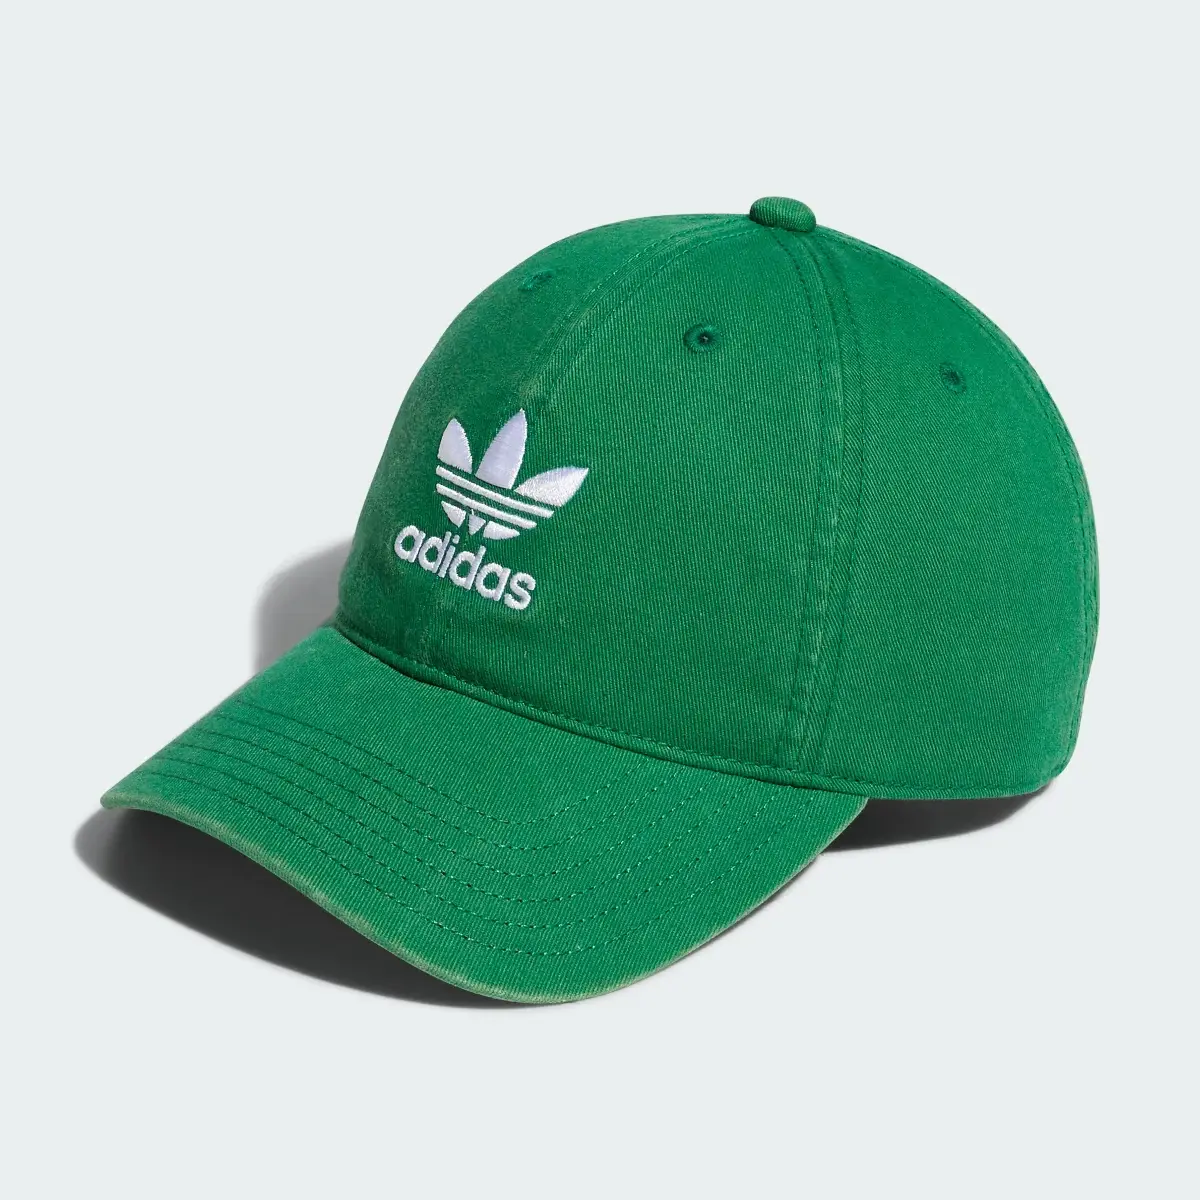 Adidas Relaxed Strap Back Hat. 2